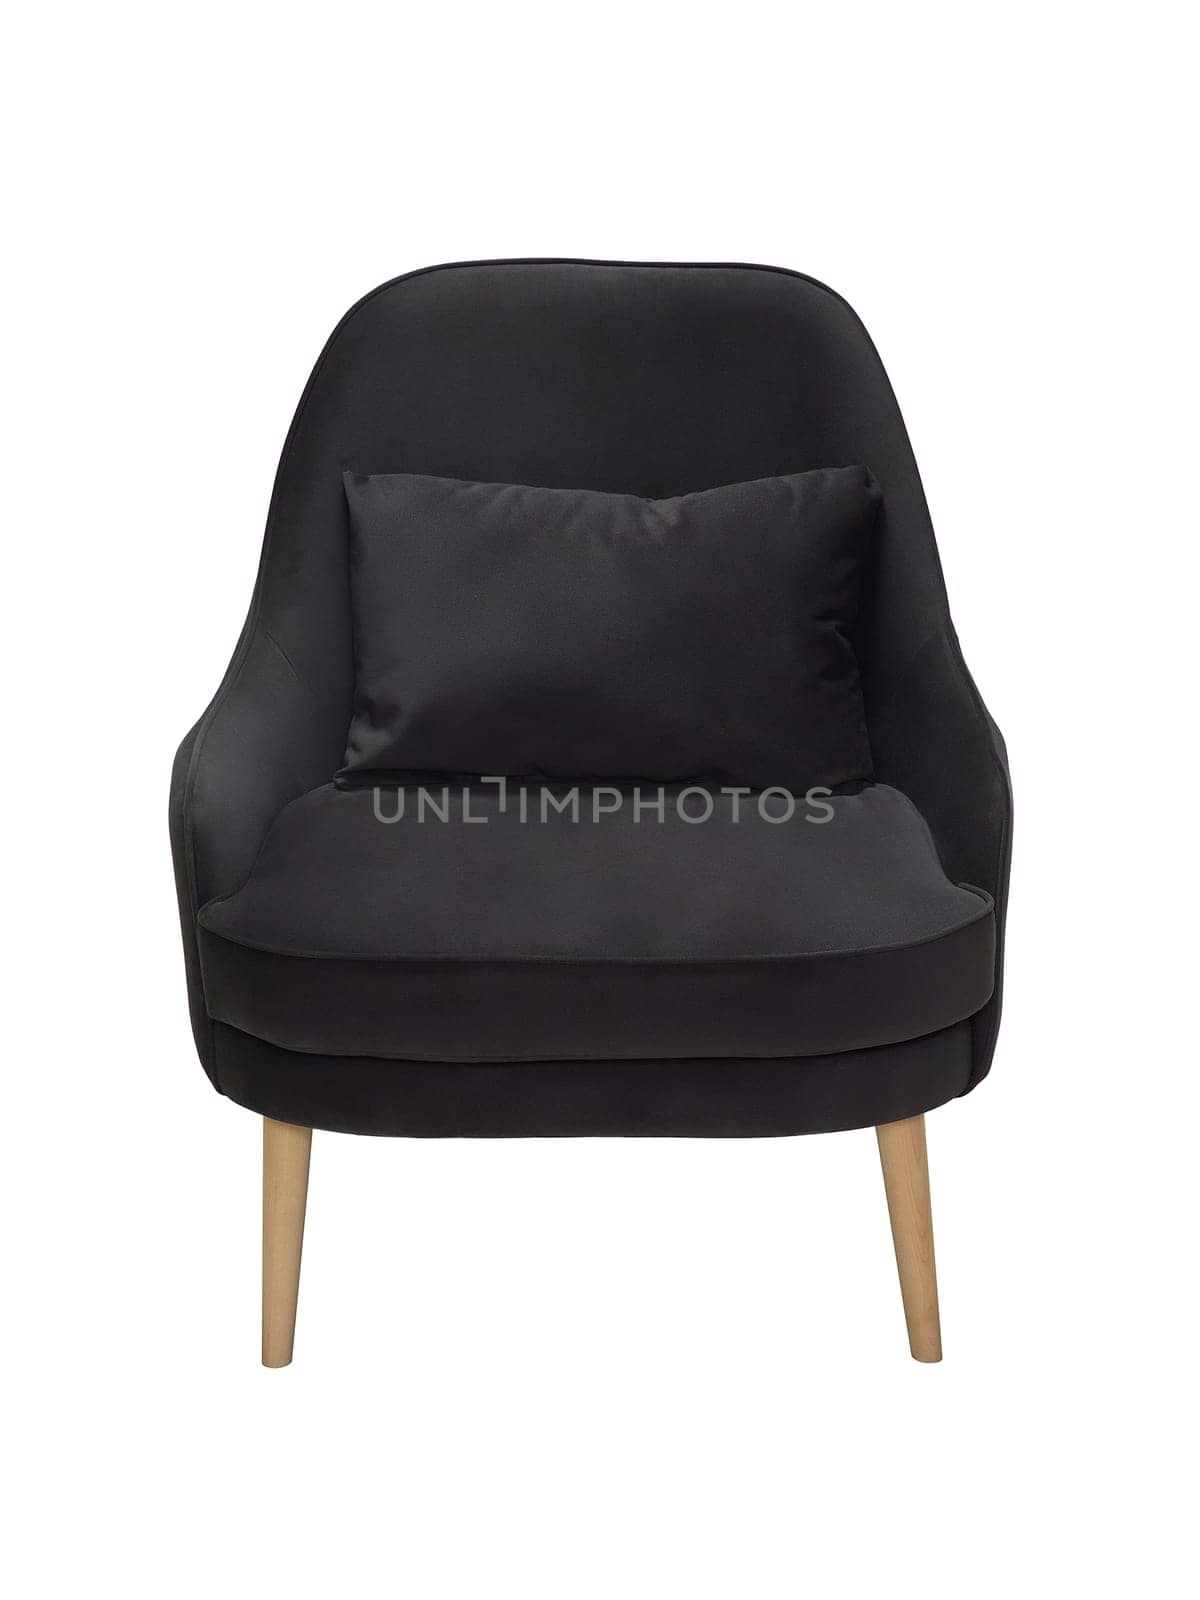 modern black fabric armchair with wooden legs isolated on white background, front view by artemzatsepilin